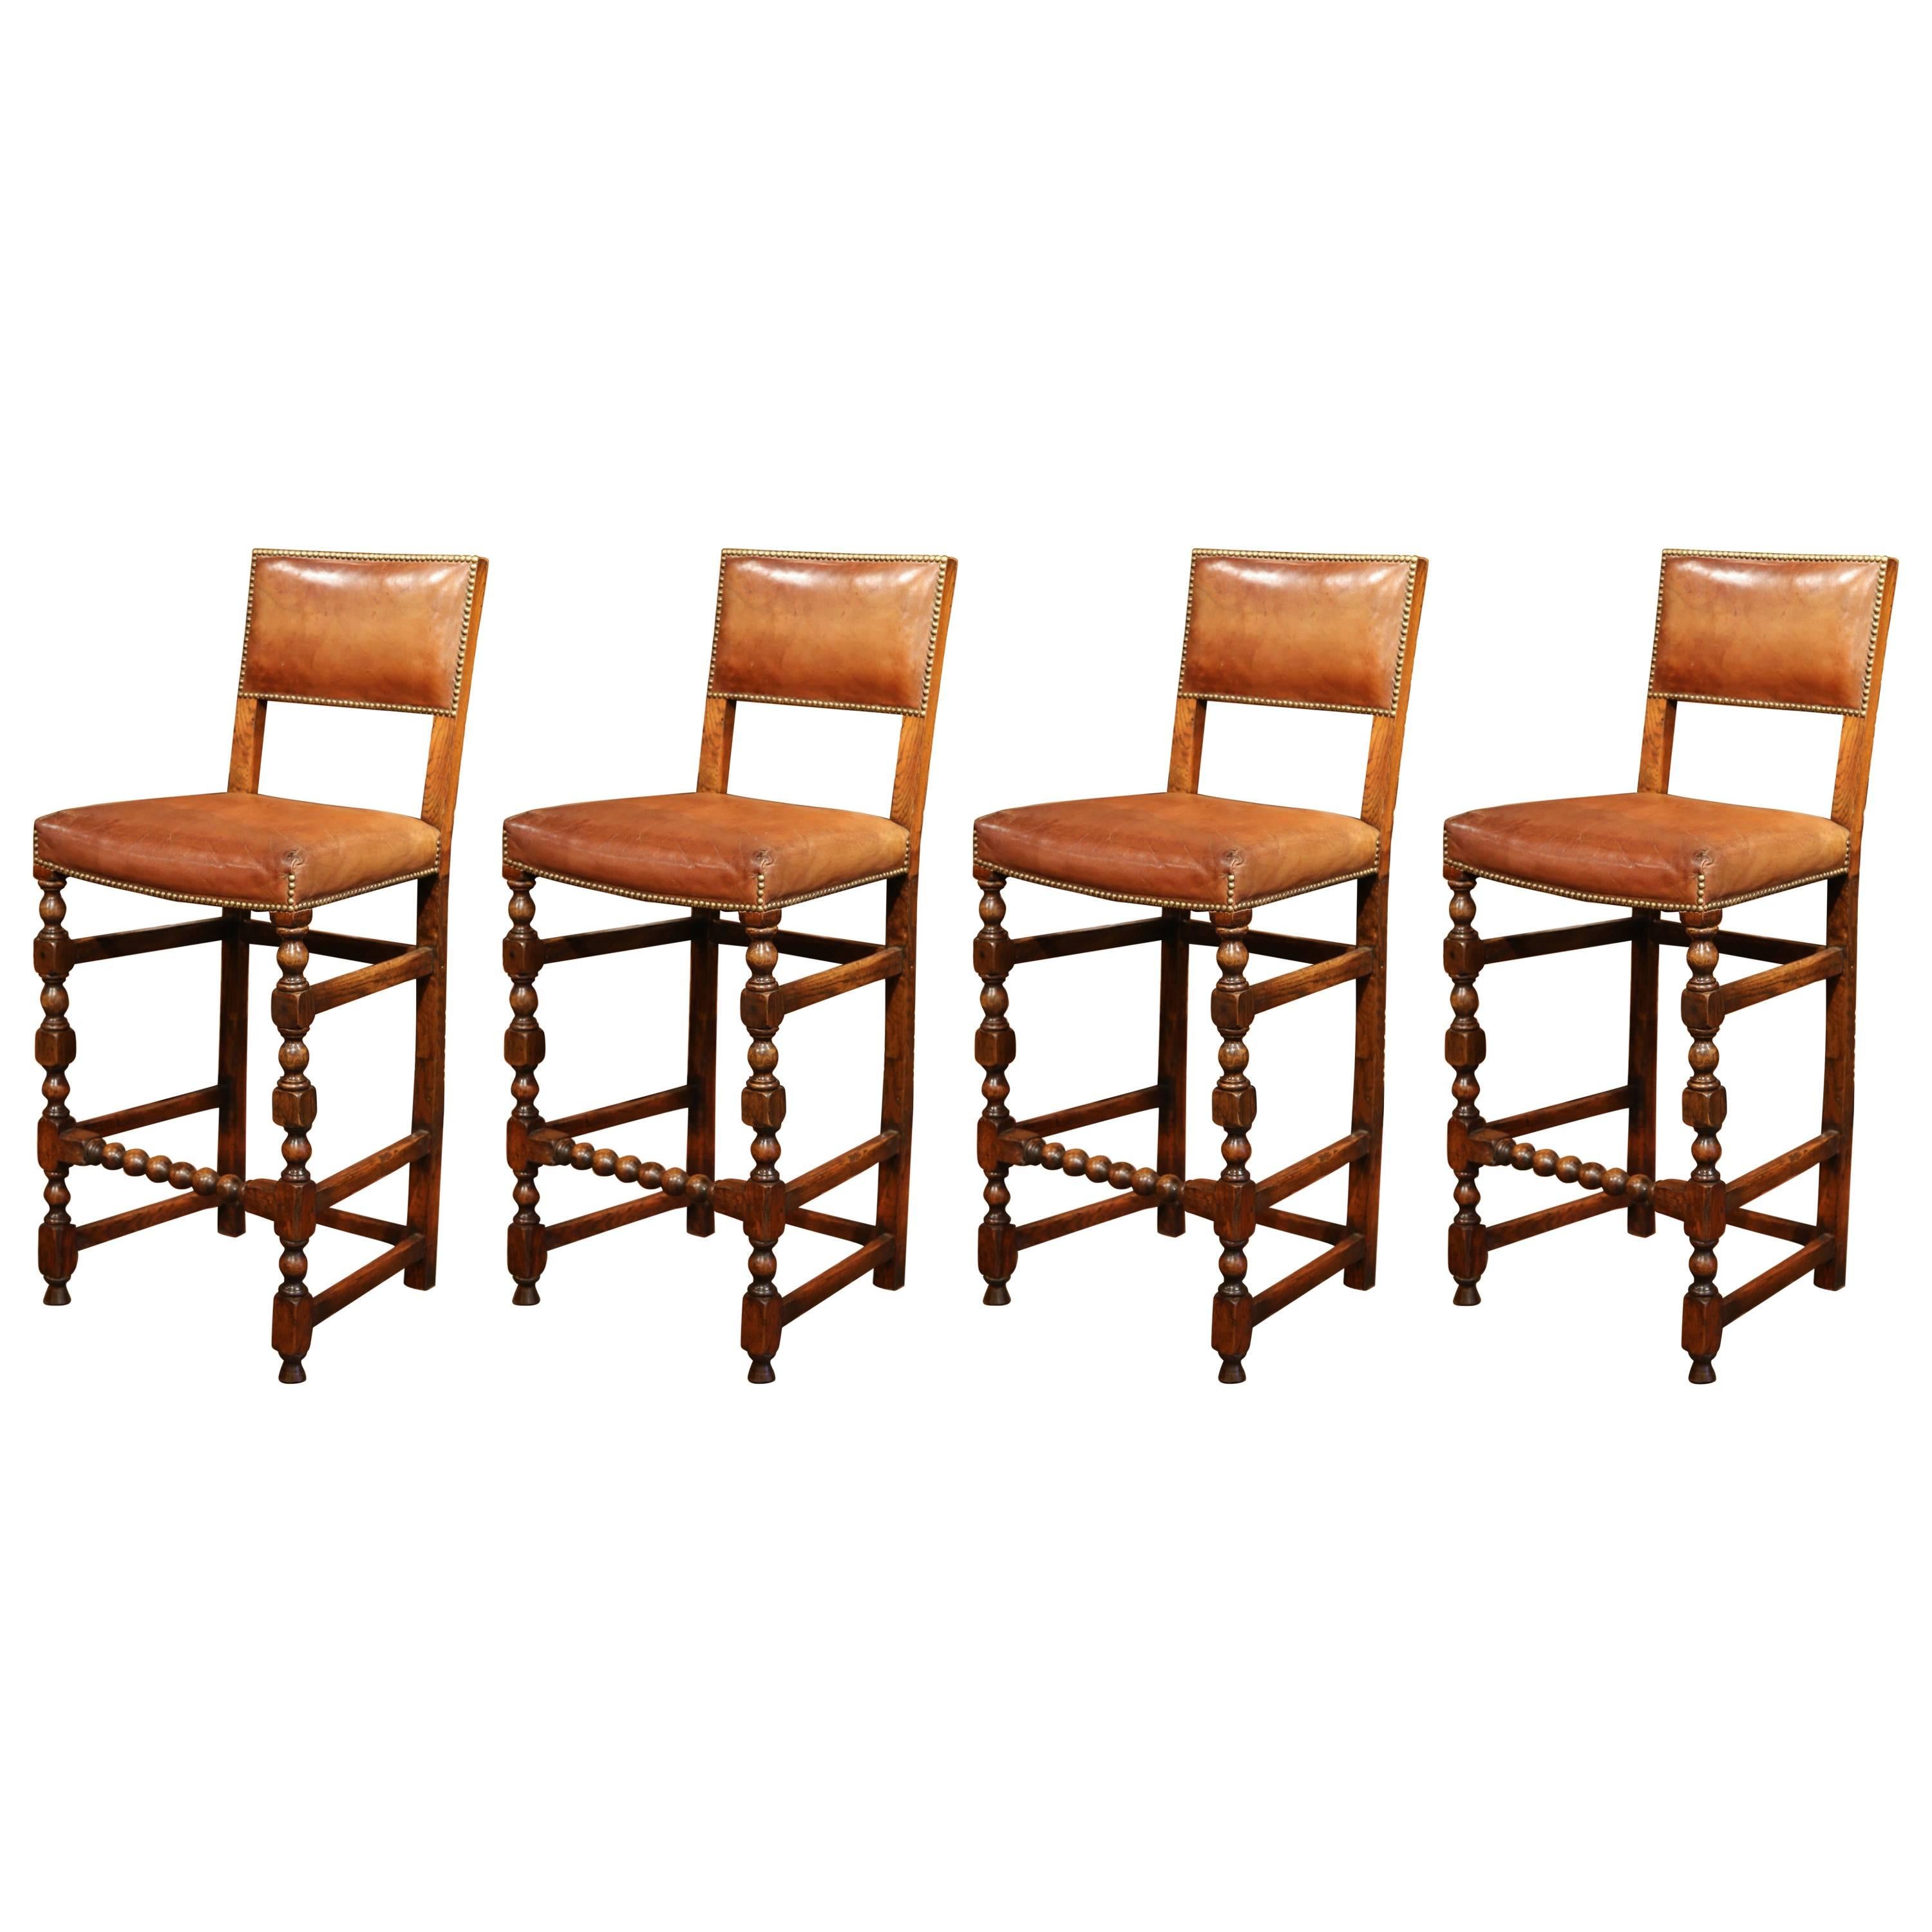 Four 19th Century French Carved Barstools with Back and Original Leather